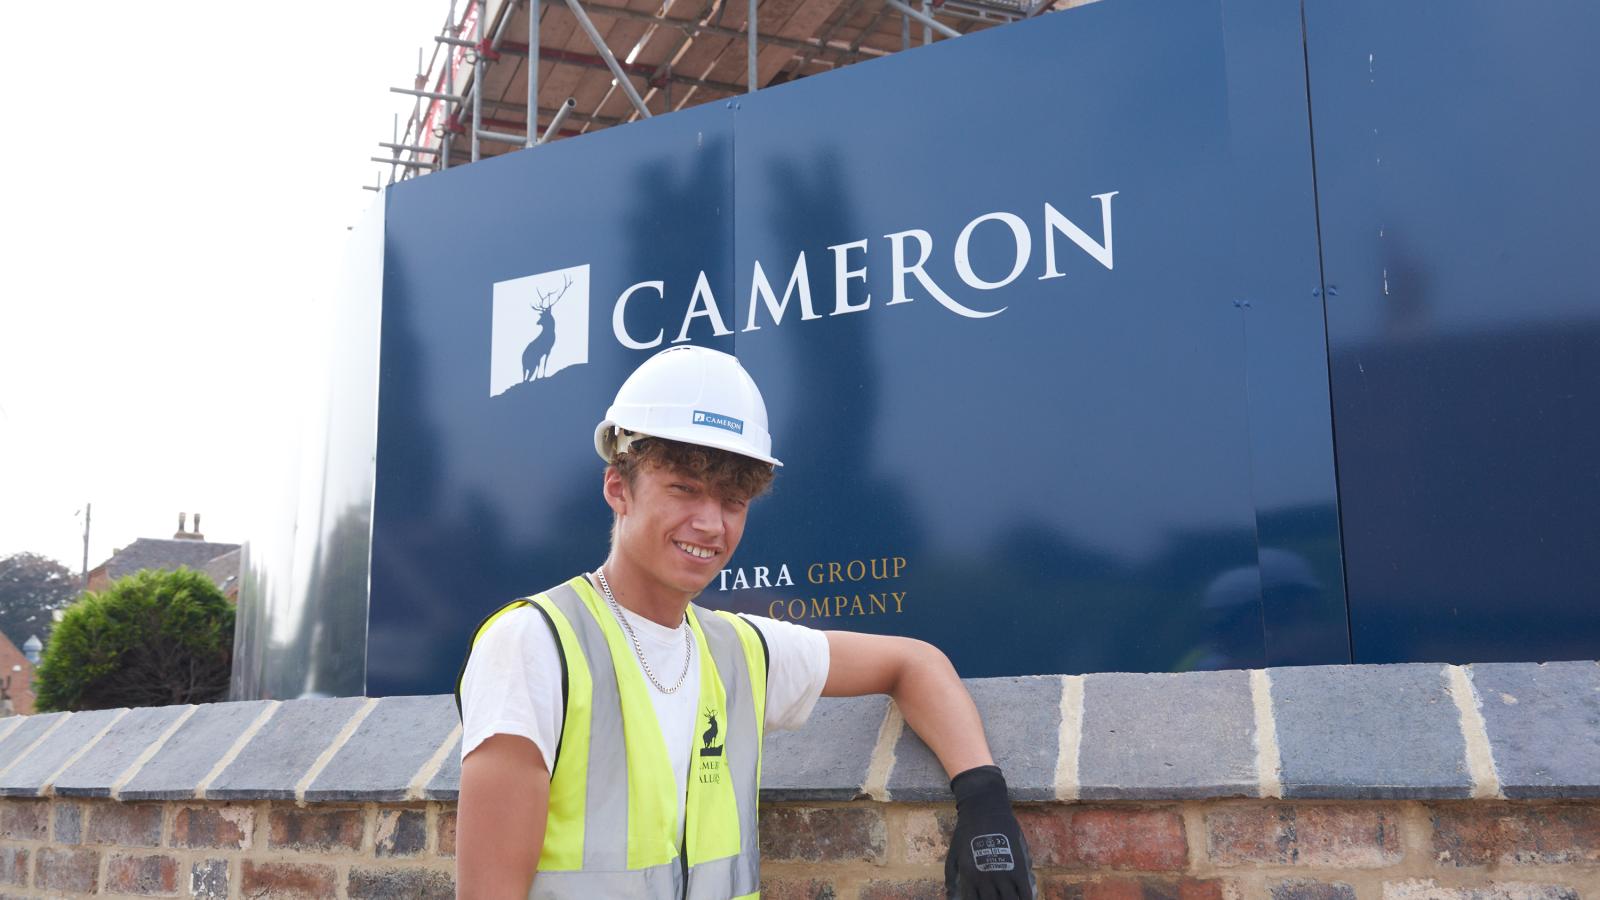 Young bricklayer on site in front of Cameron sign